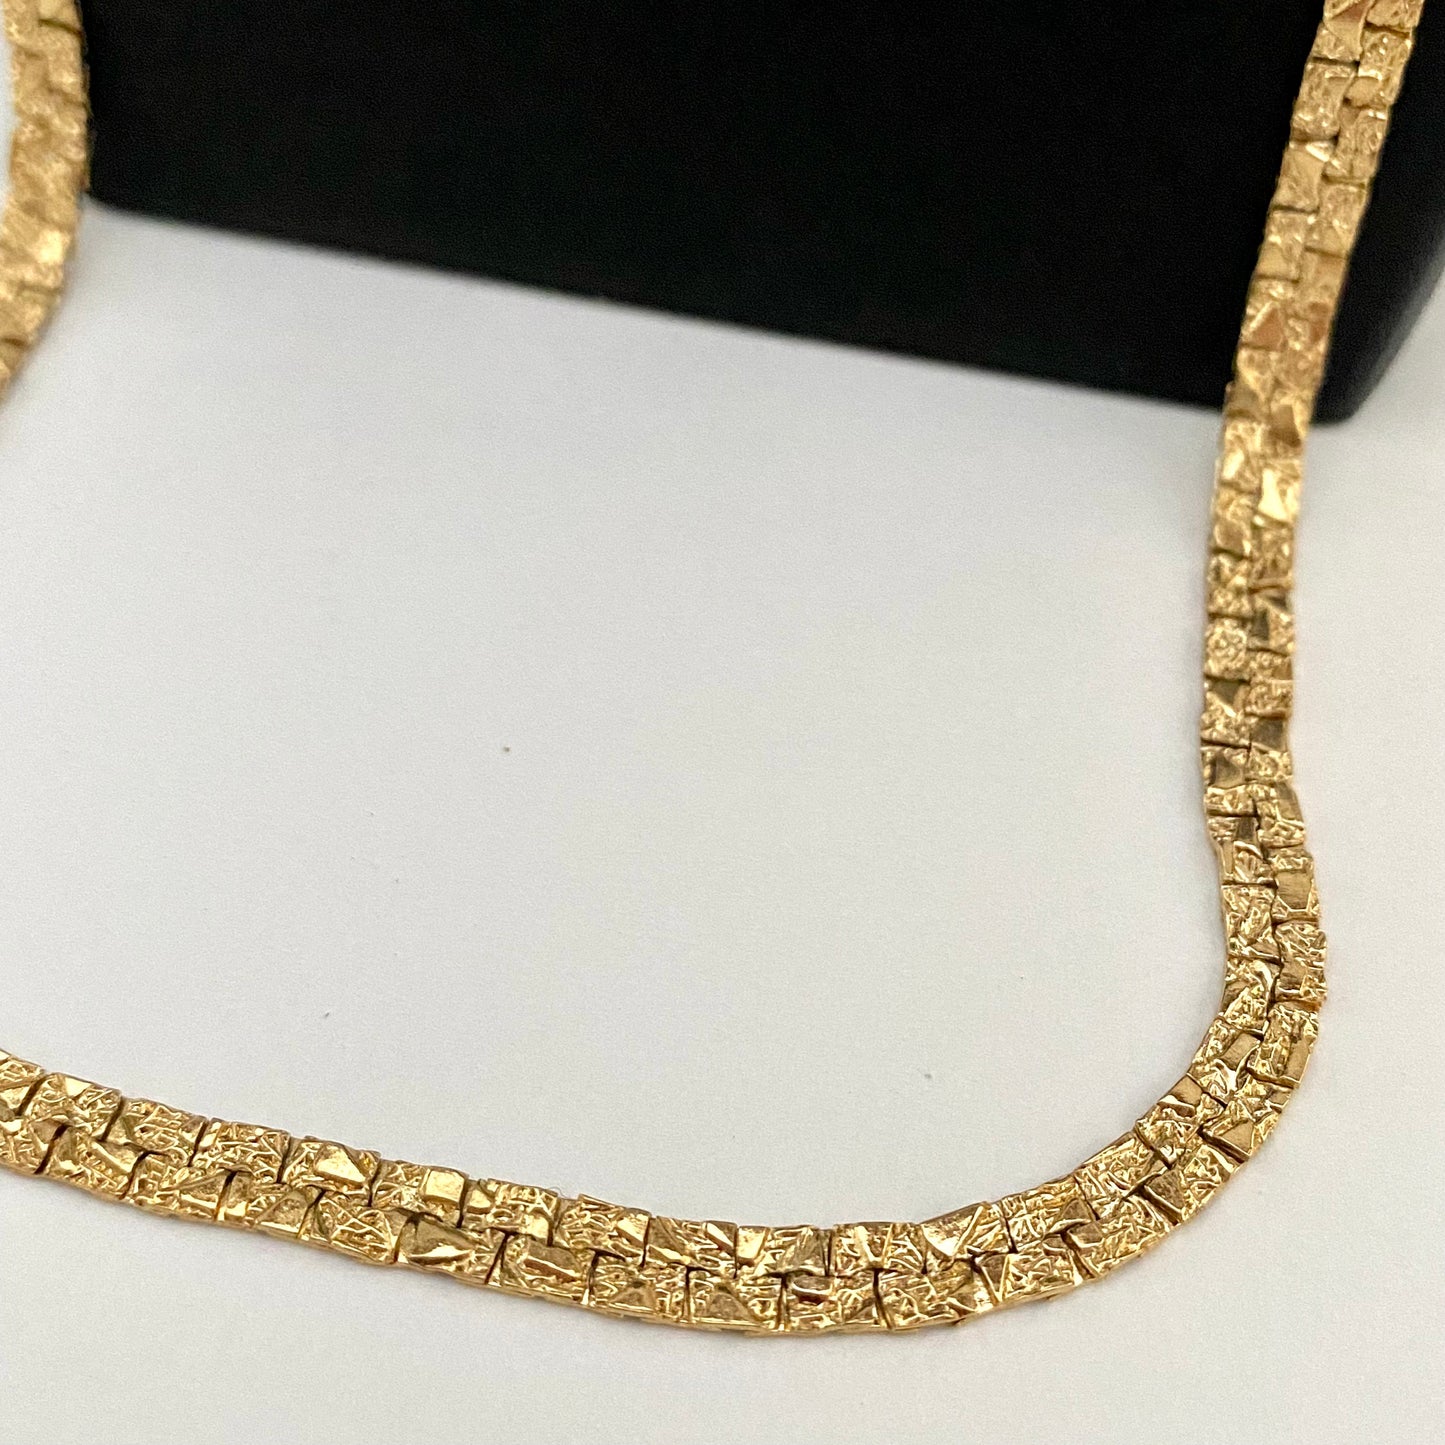 Late 70s/ Early 80s Trifari Necklace